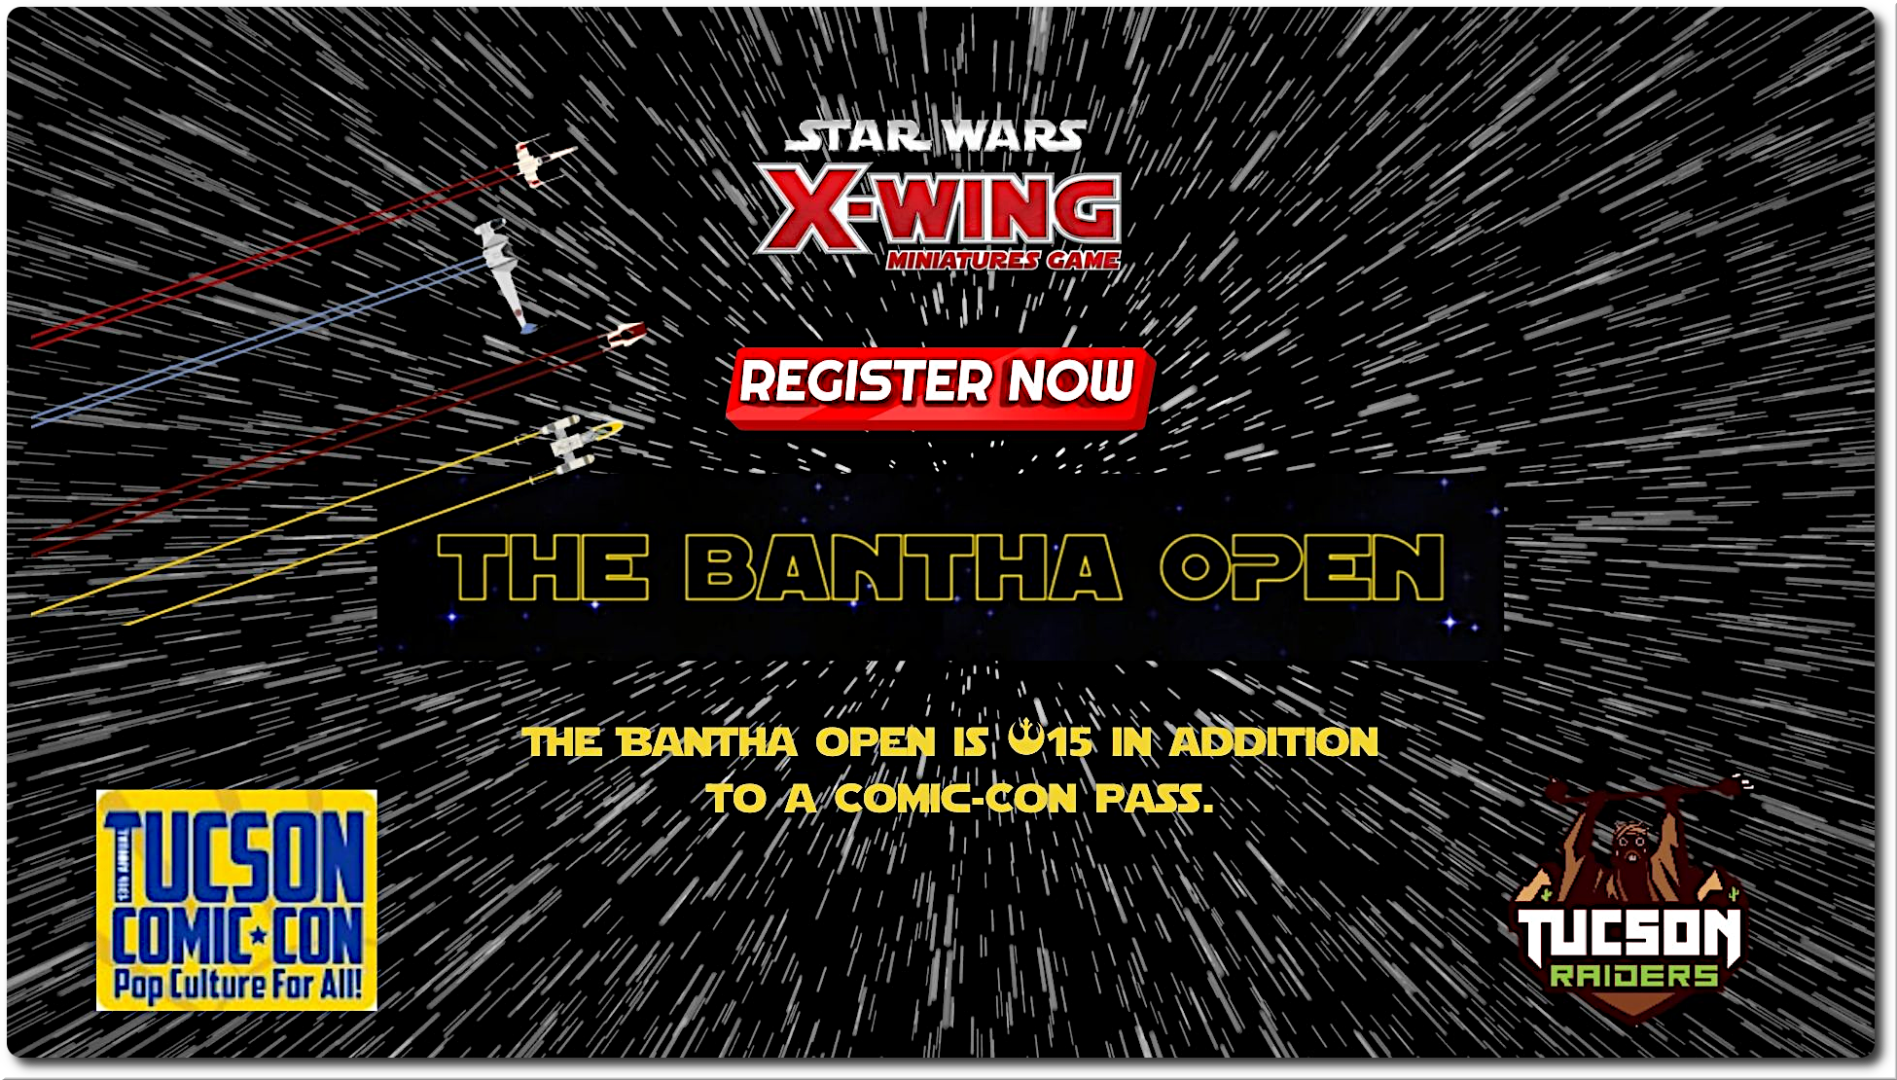 The Bantha open is $15 in addition to a Comic-Con pass.